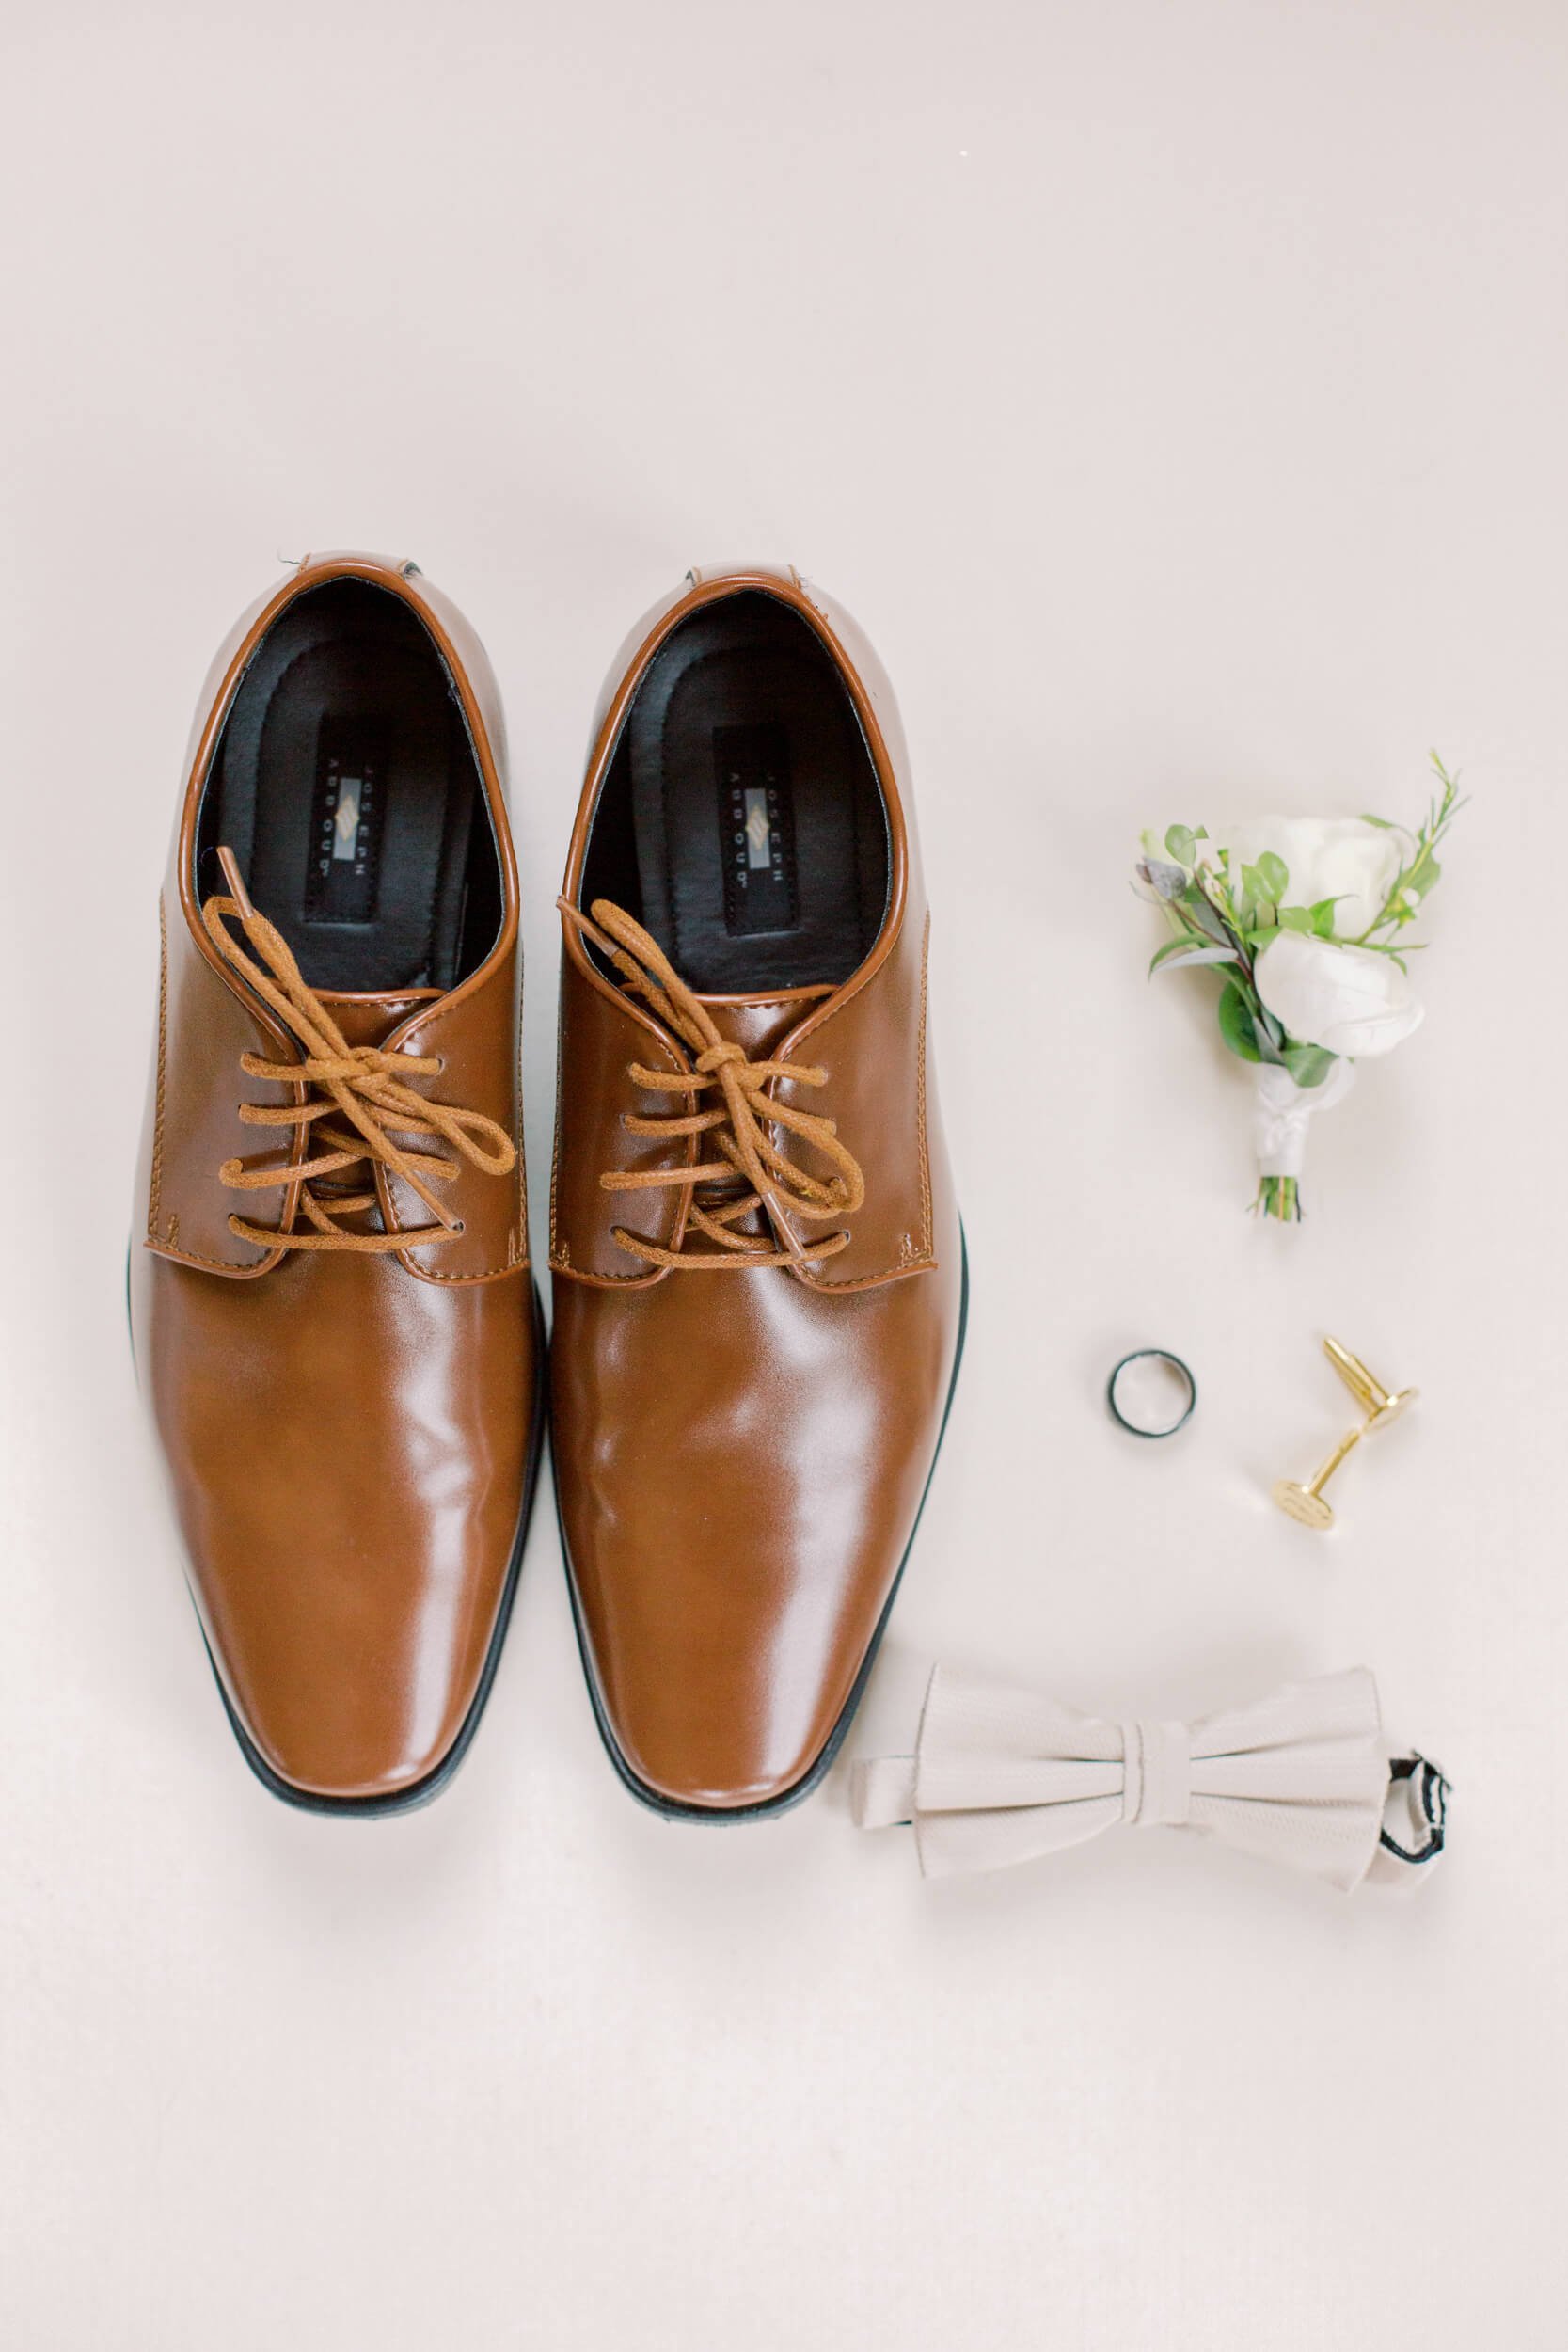 FlatLay_Tip_For_Brides_Tiffany_Sangster_Photography-20.jpg